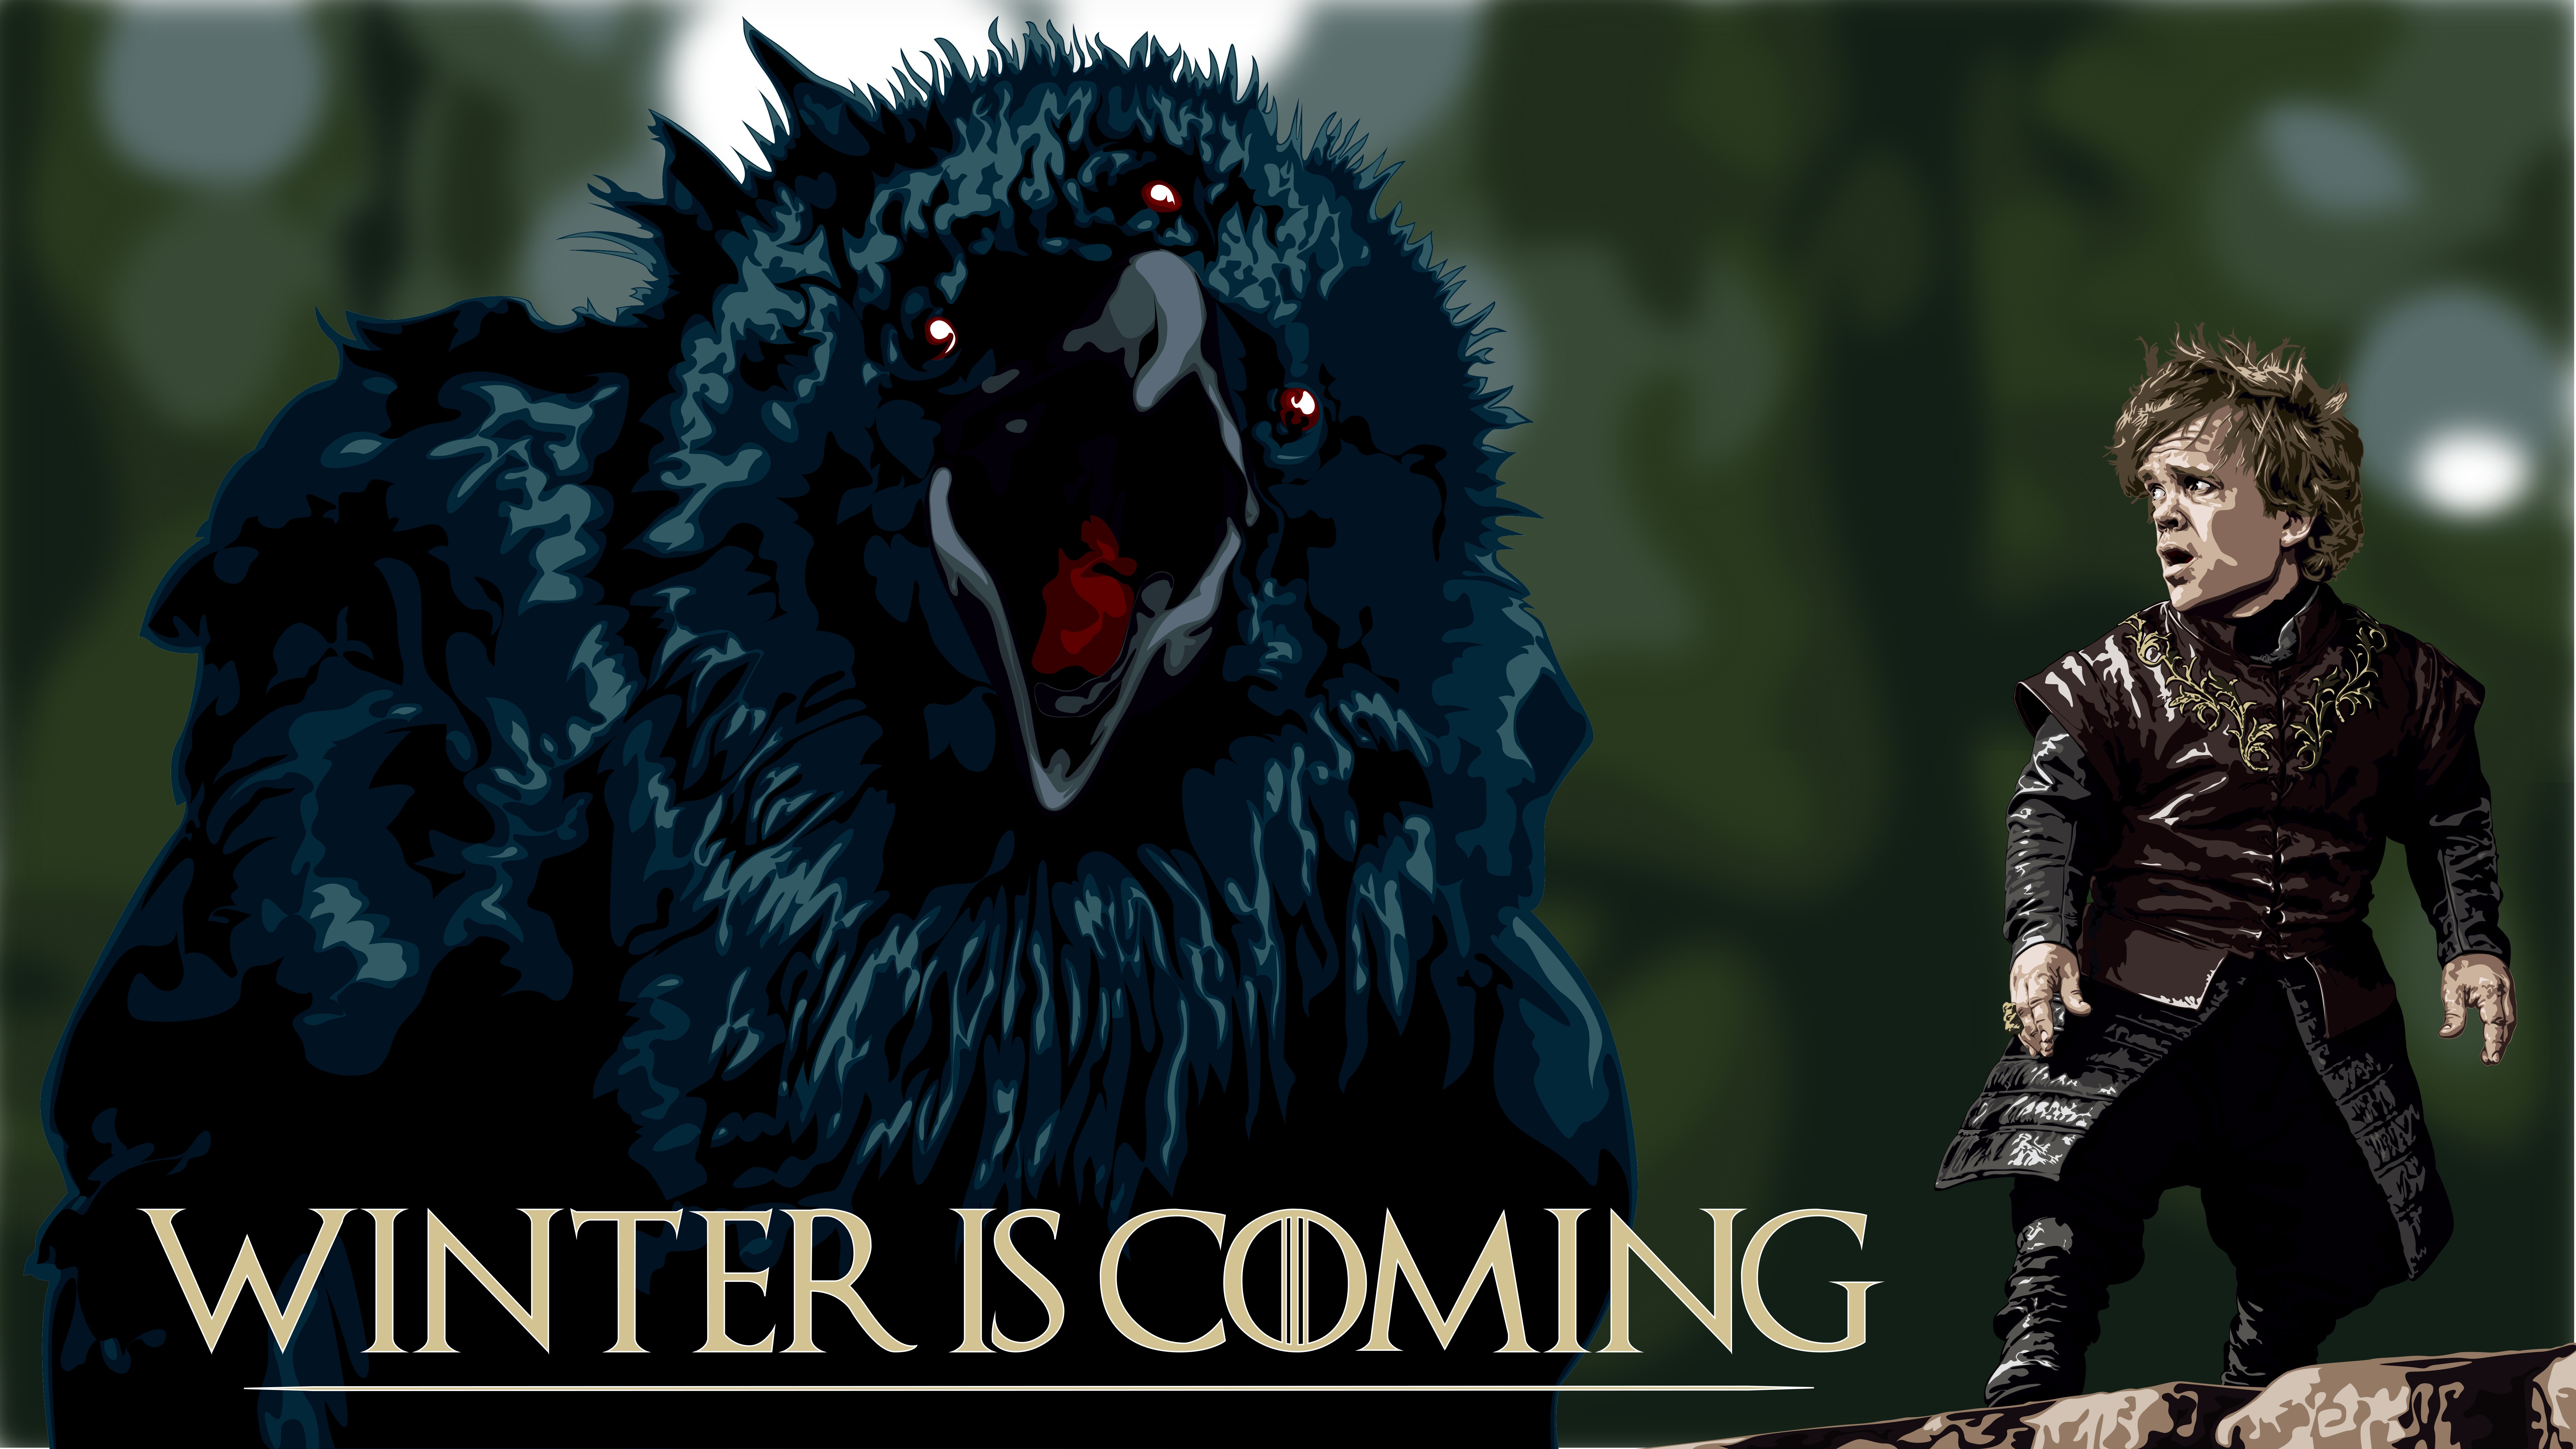 General 8000x4500 Three eyed crows Game of Thrones Peter Dinklage Tyrion Lannister Winter Is Coming TV series birds digital art text